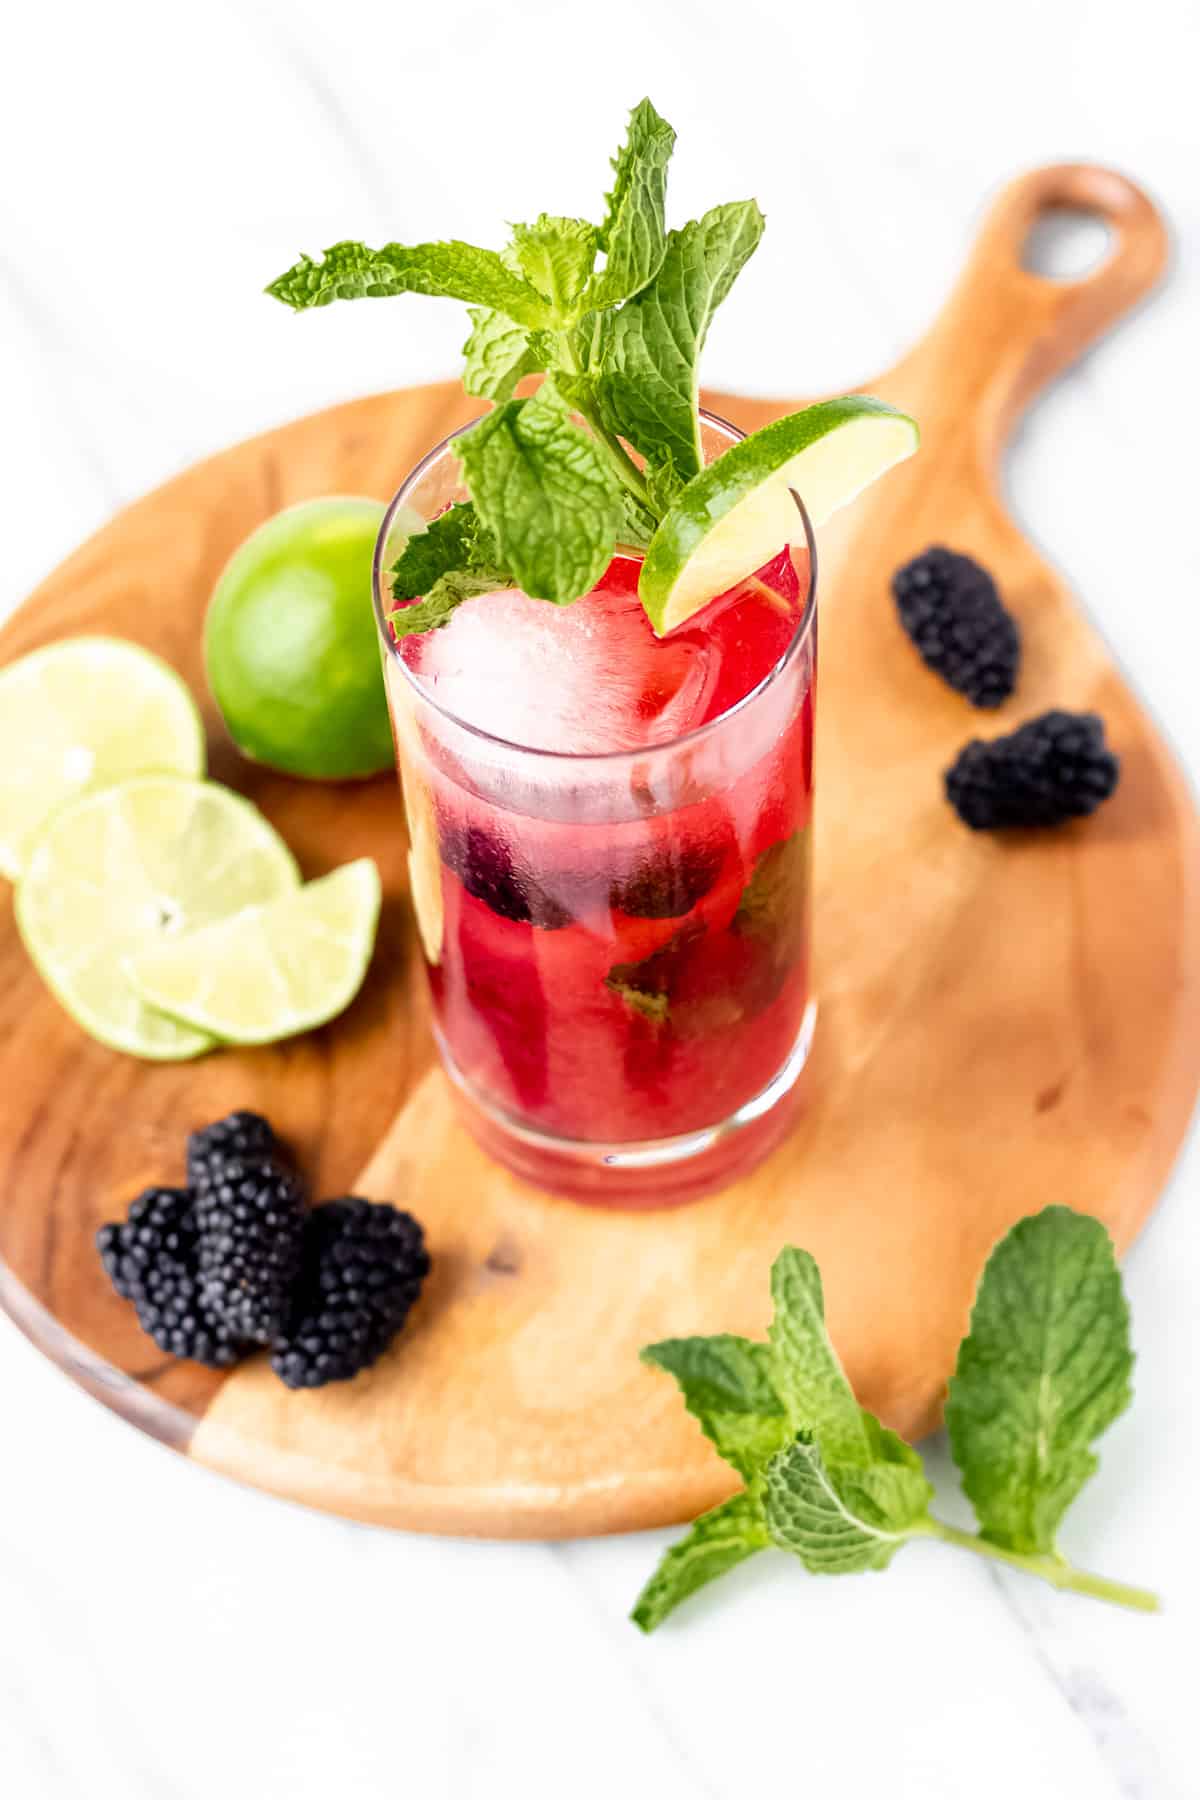 A blackberry mojito on a circular wood board with limes, blackberries and mint leaves around it.